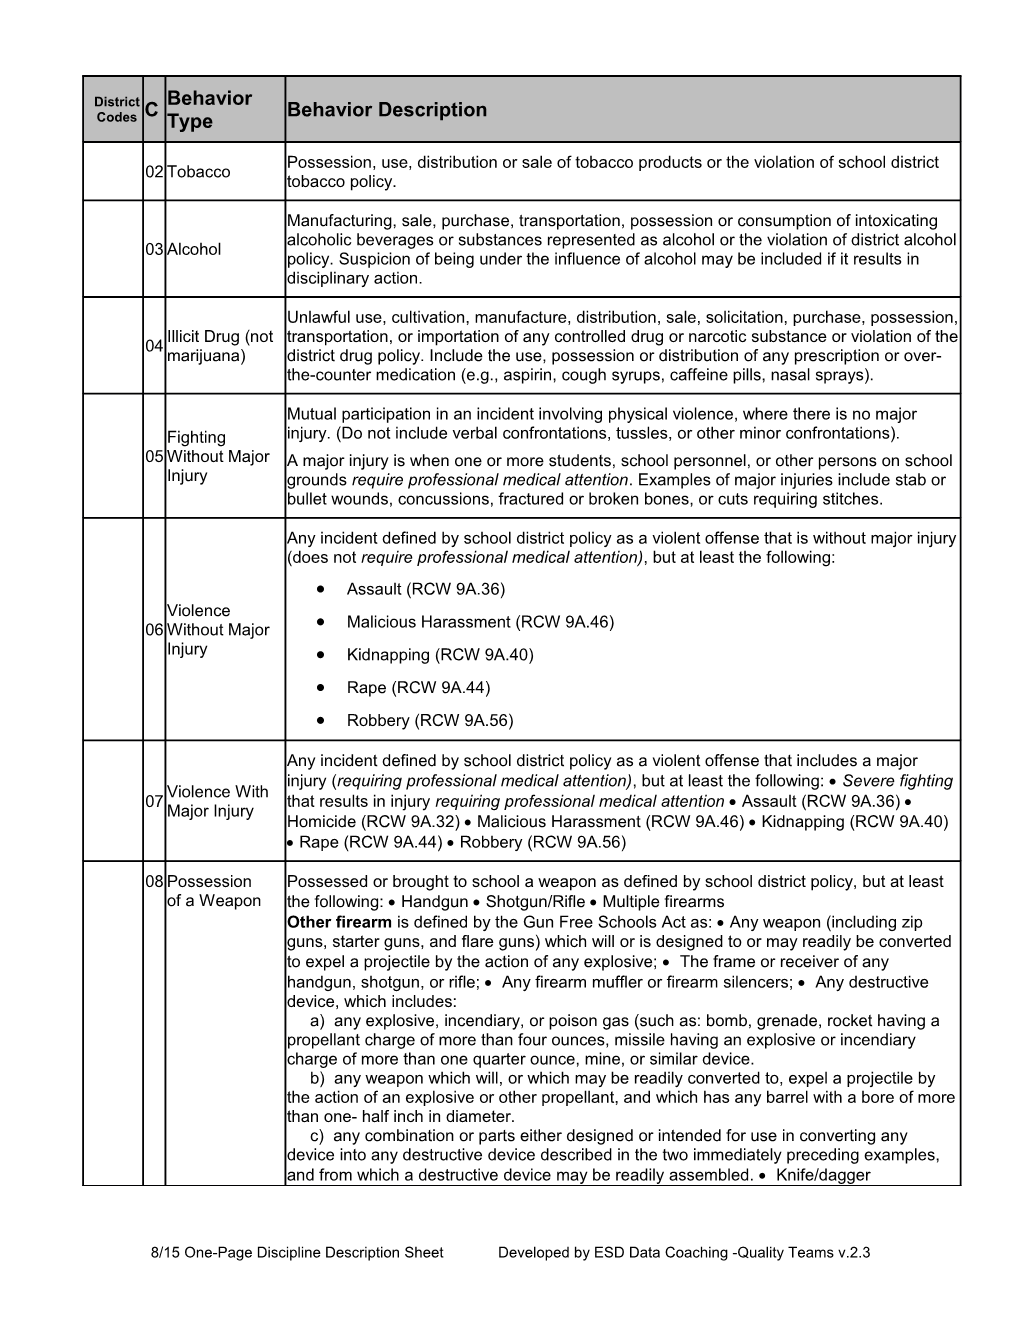 8/15 One-Page Discipline Description Sheet Developed by ESD Data Coaching -Quality Teams V.2.3